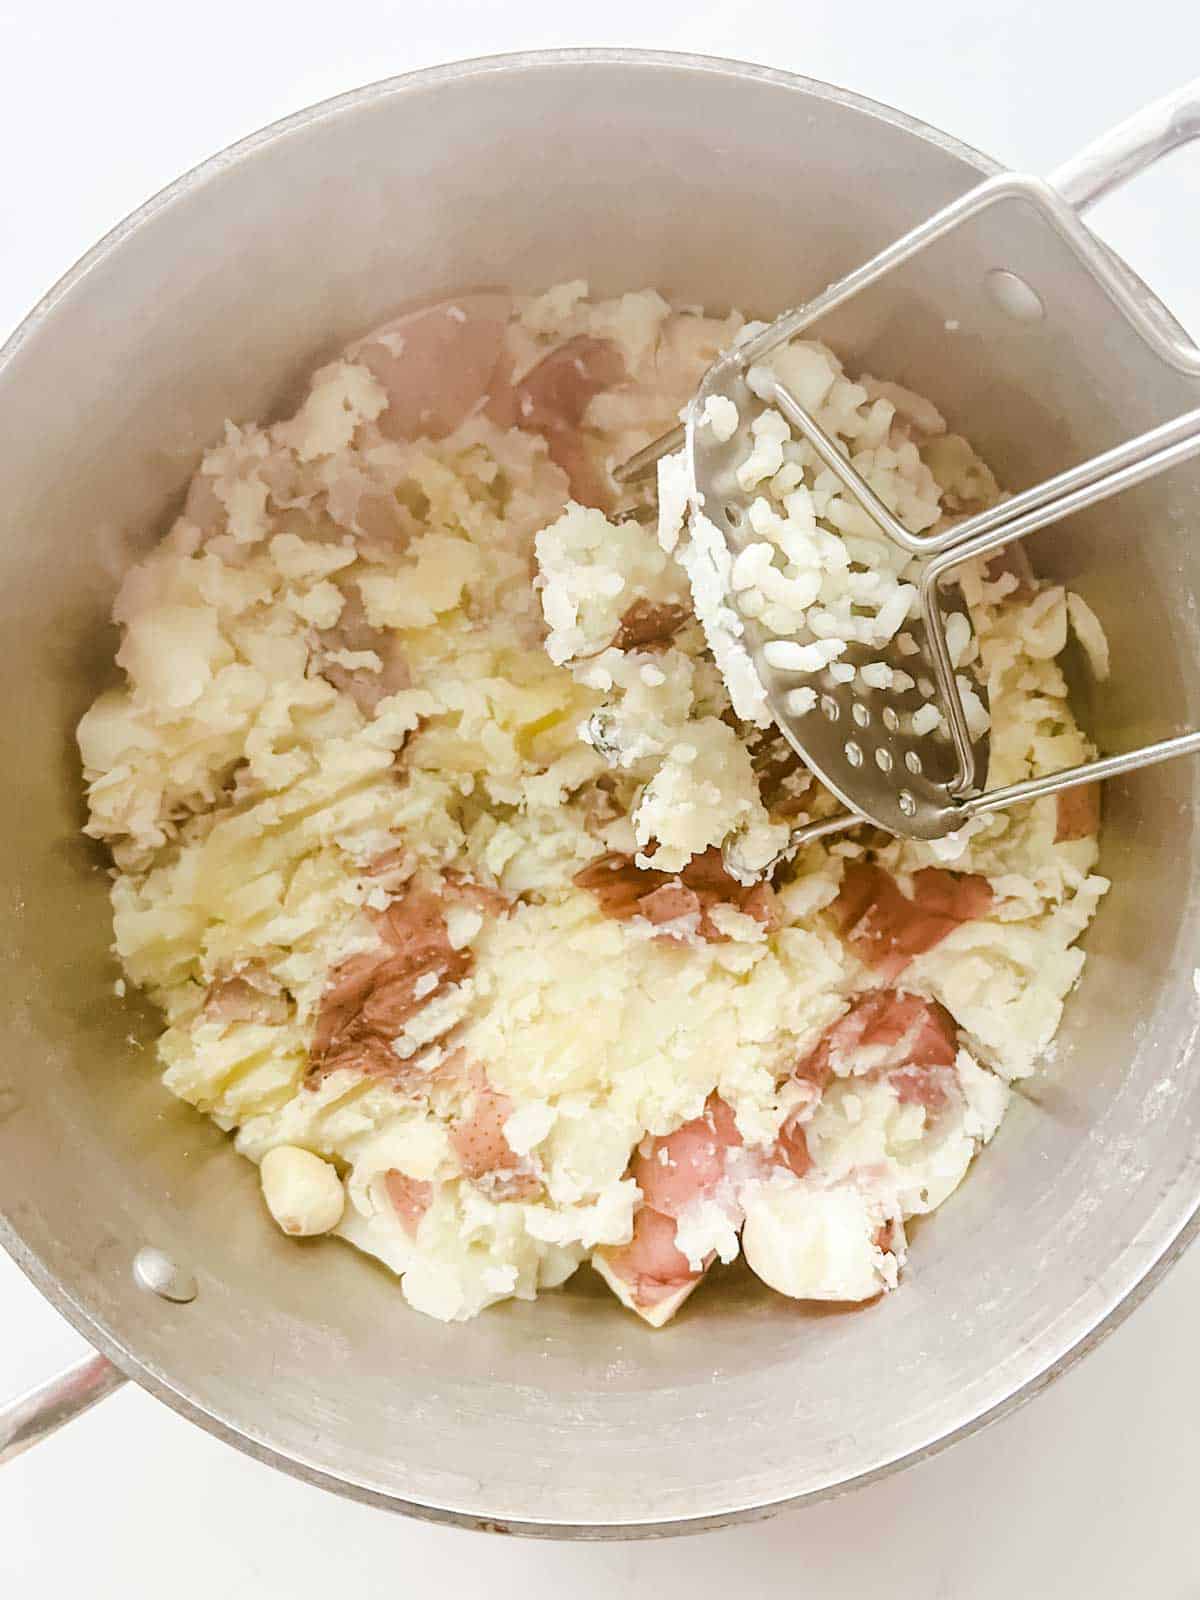 Photo of red potatoes being mashed with a potato masher.